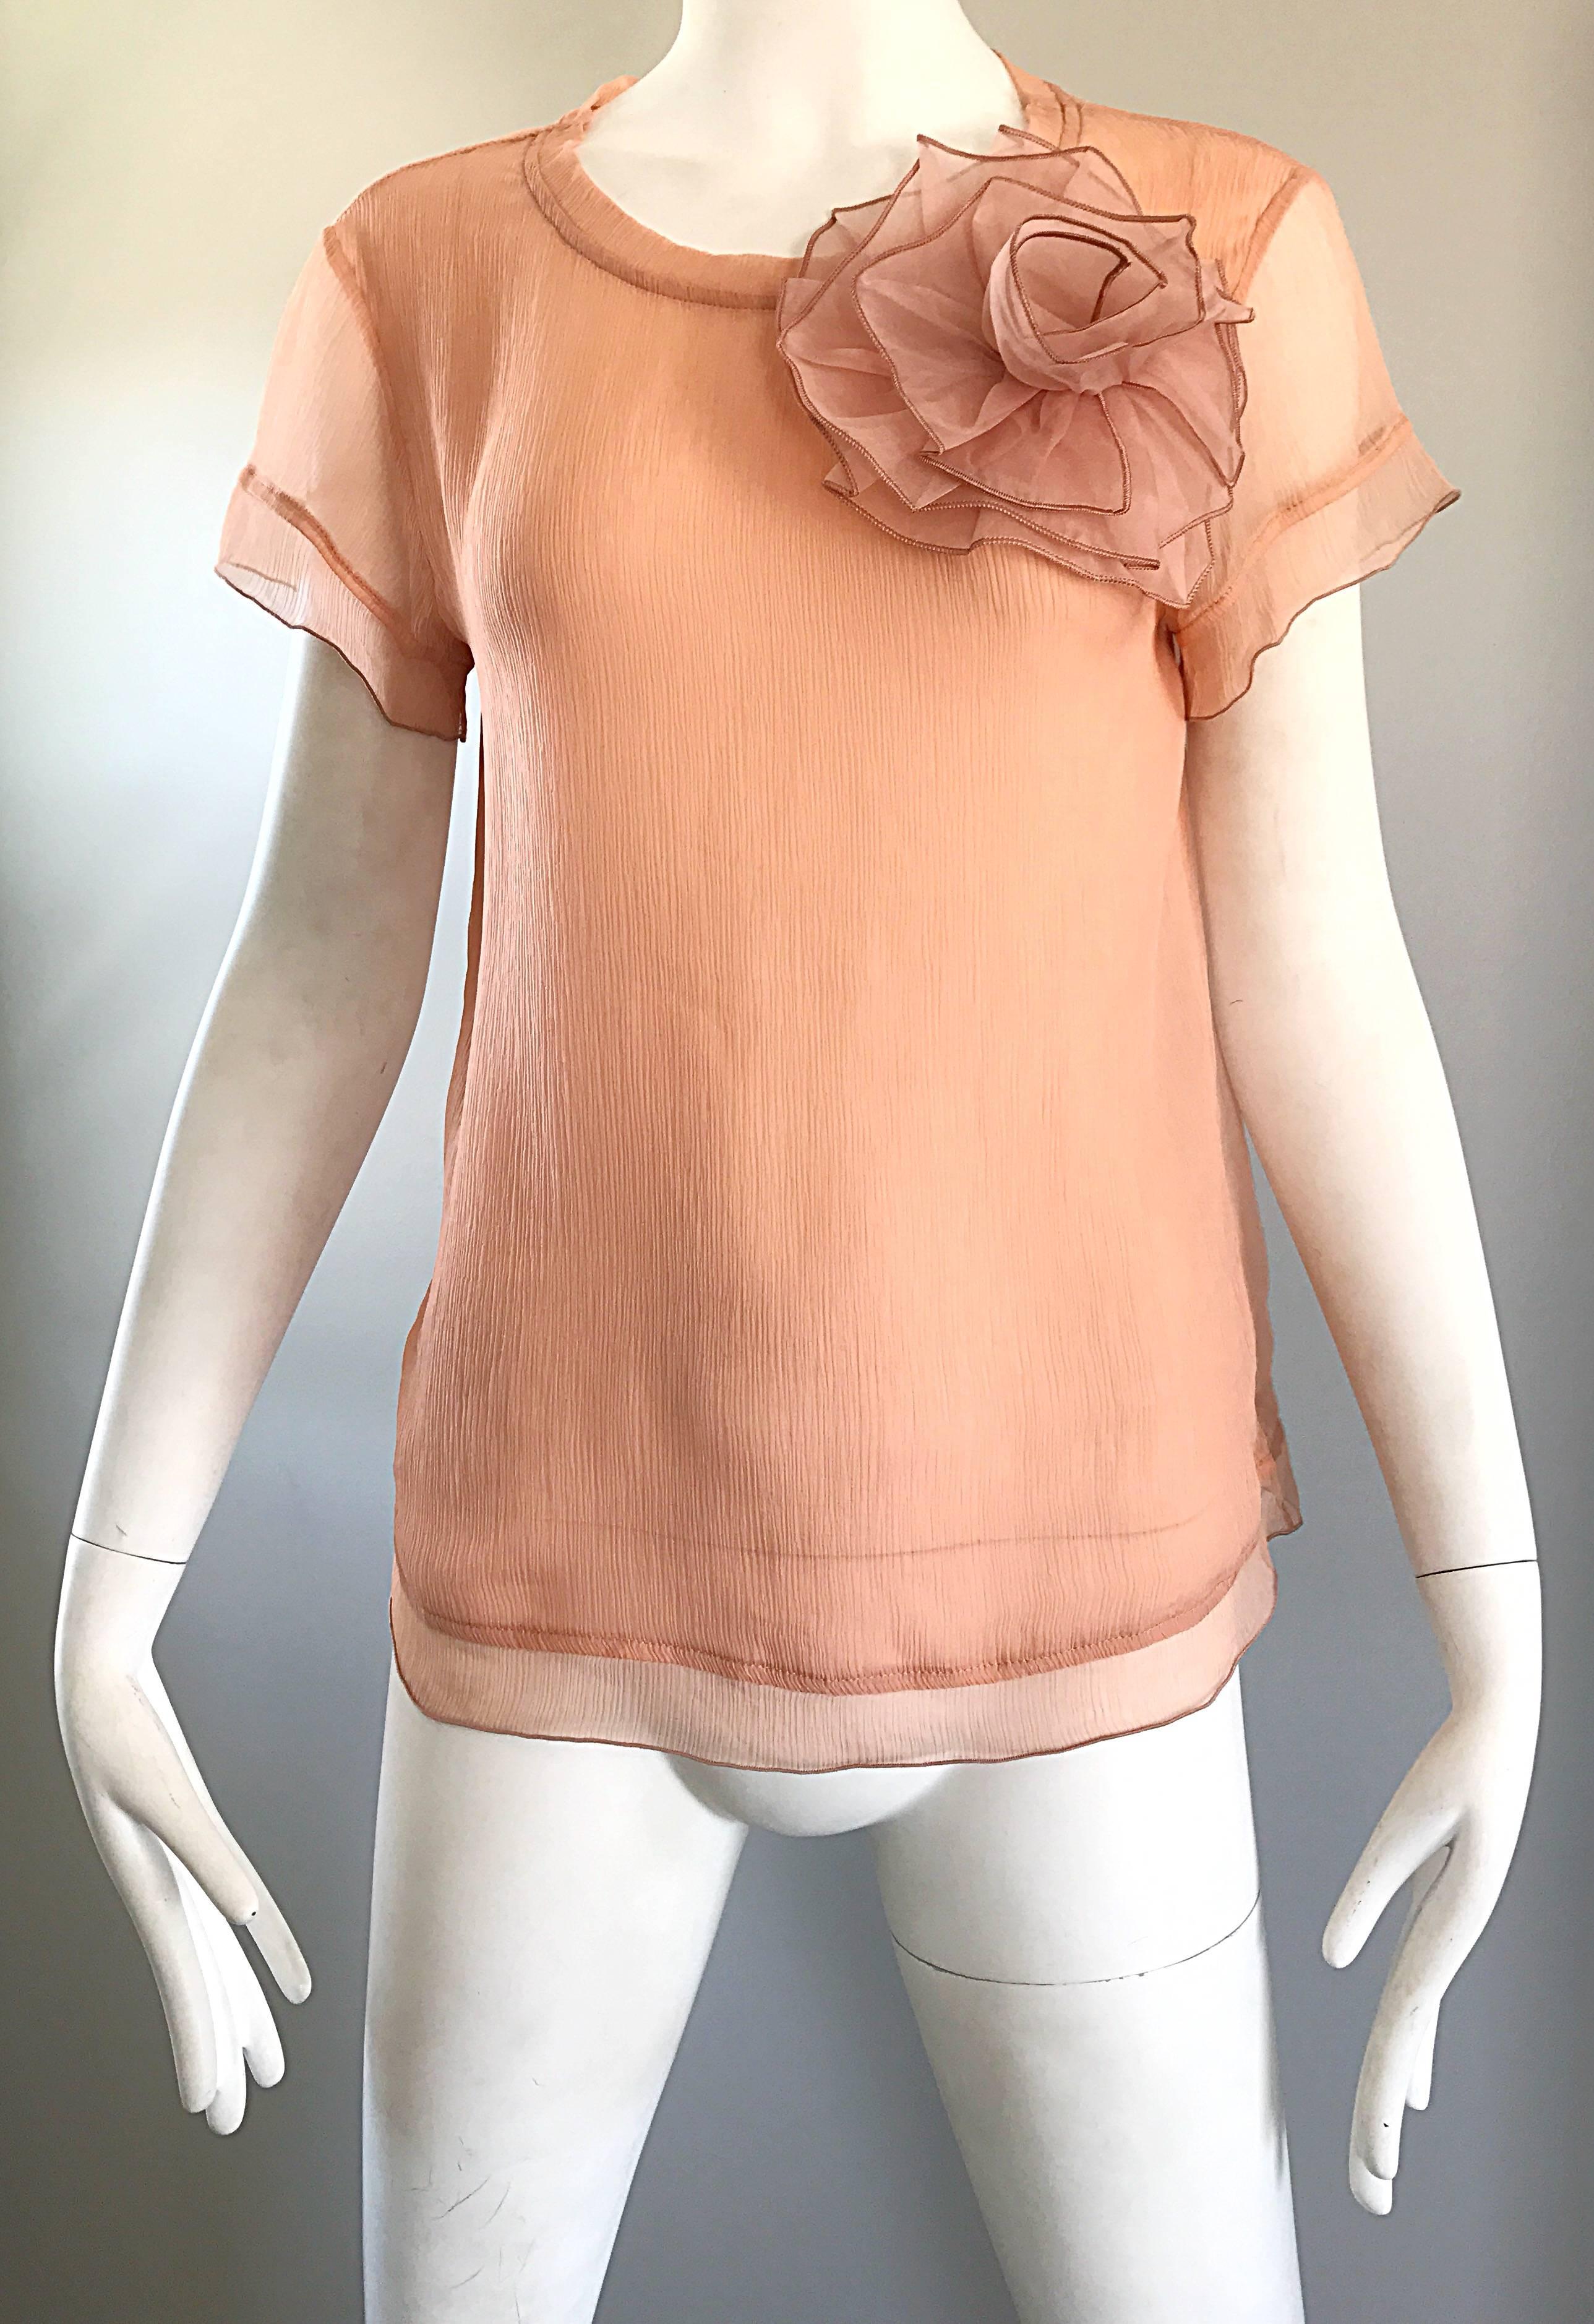 1990s Blumarine by Anna Molinari Light Pink Peach Chiffon Semi Sheer Blouse Top In Excellent Condition For Sale In San Diego, CA